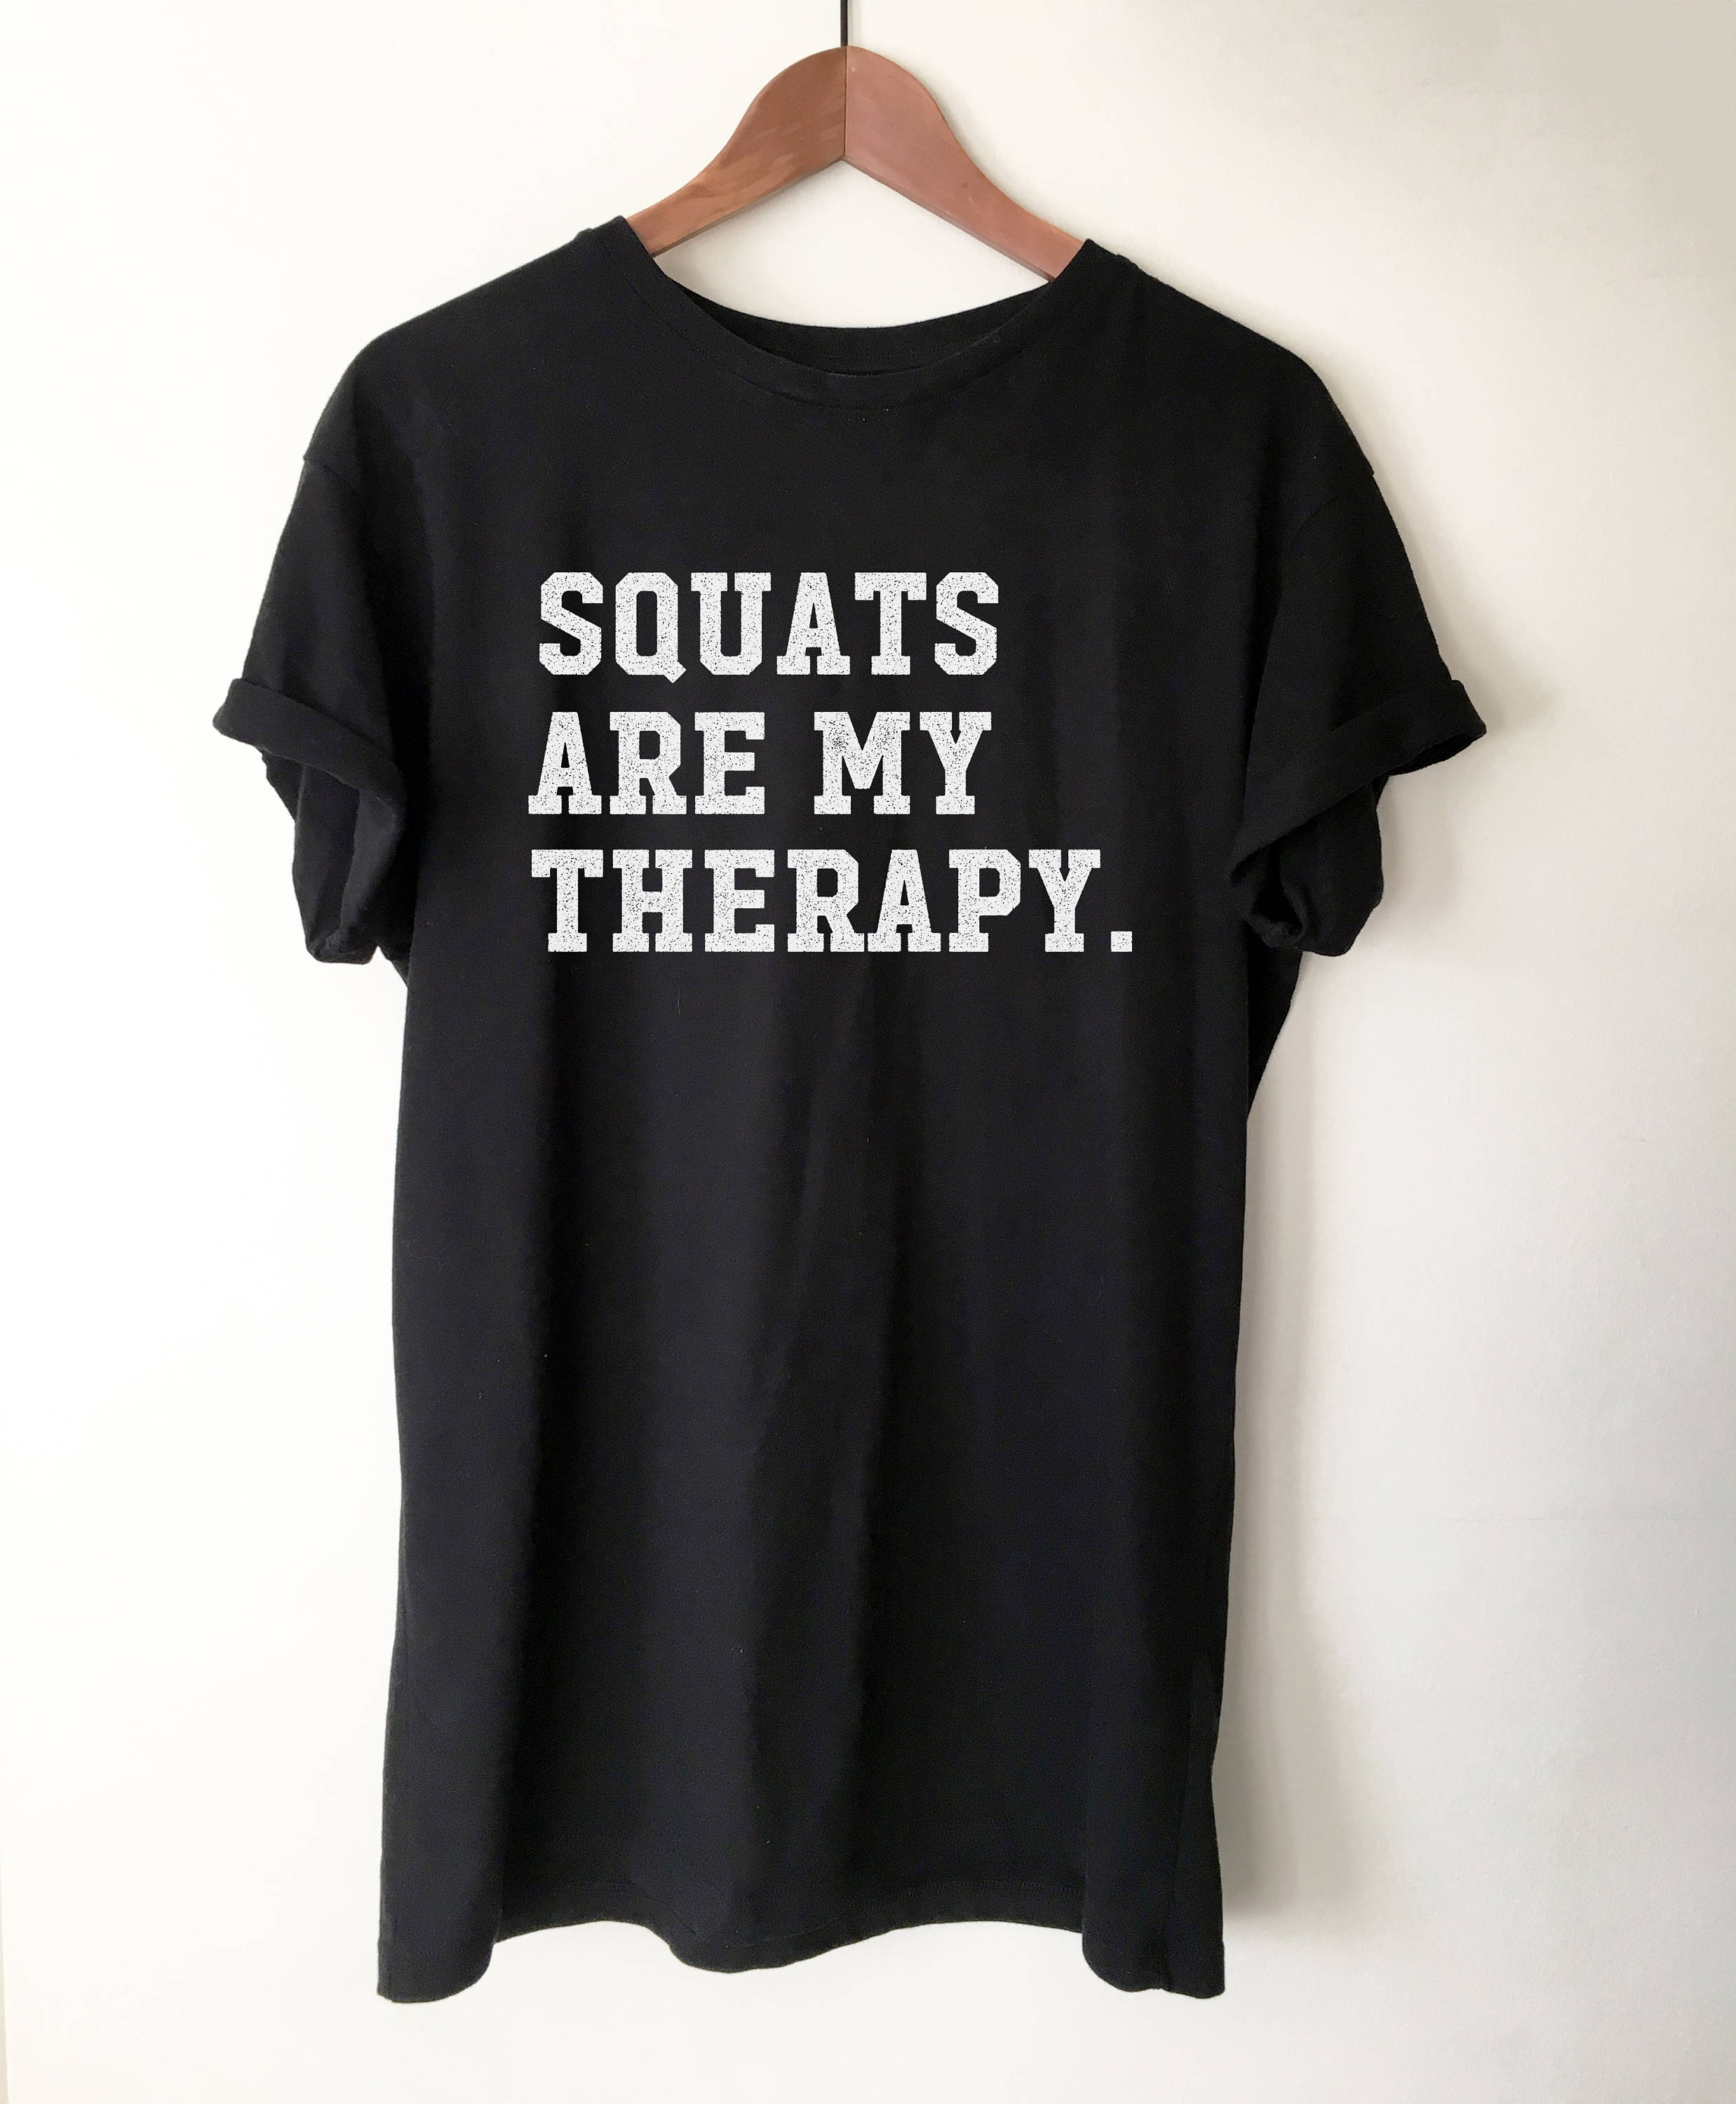 Workout shirt Squat shirt Funny workout shirt Squat day shirt Squats Are My Therapy Hooded Sweatshirt Funny Squats Shirt Gym shirt